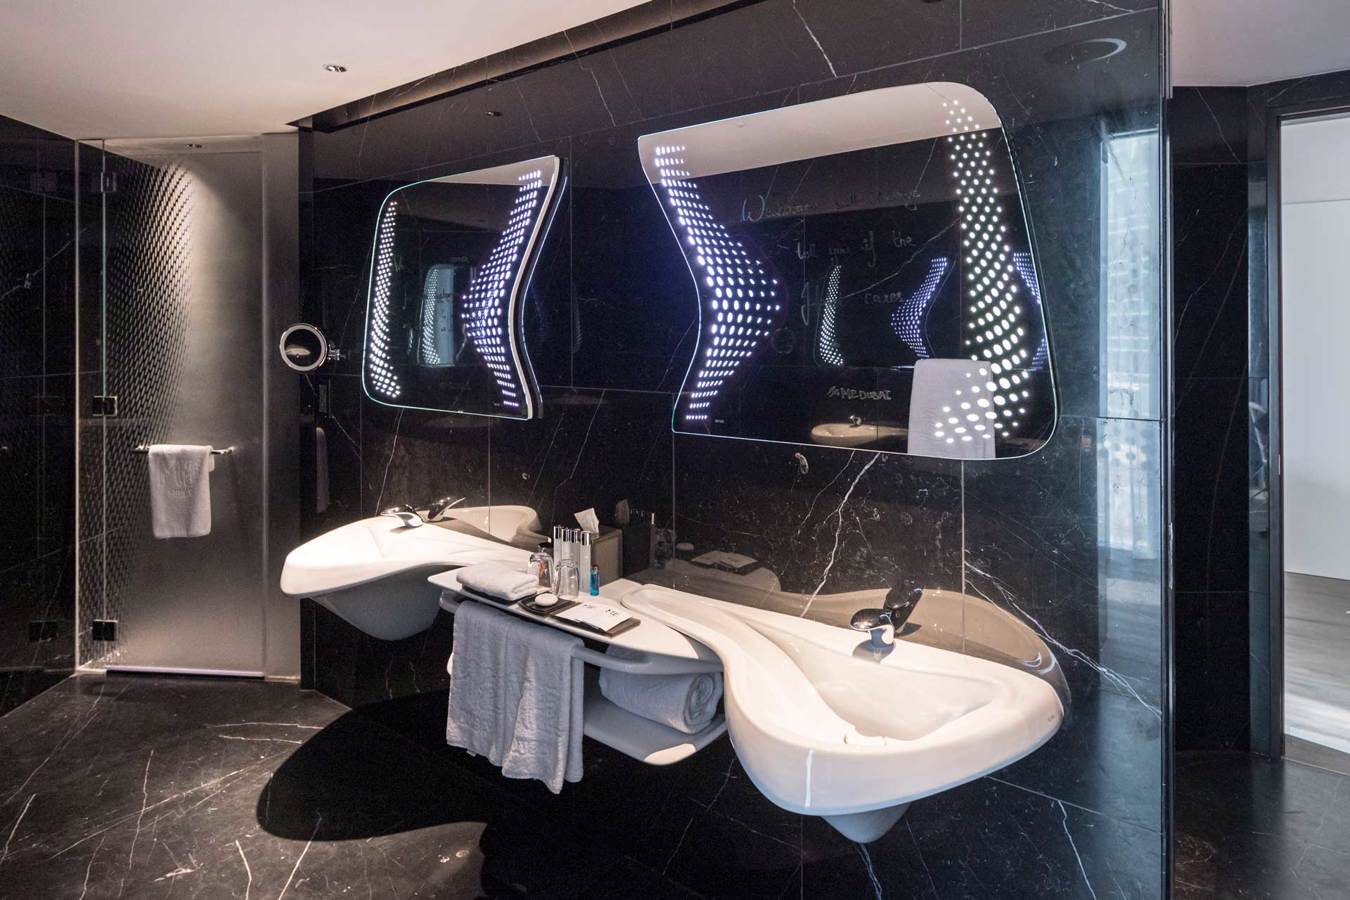 ME Dubai hotel at the Opus by ZahaHadid Architects. Copyright © Photograph by Laurian Ghinitoiu.